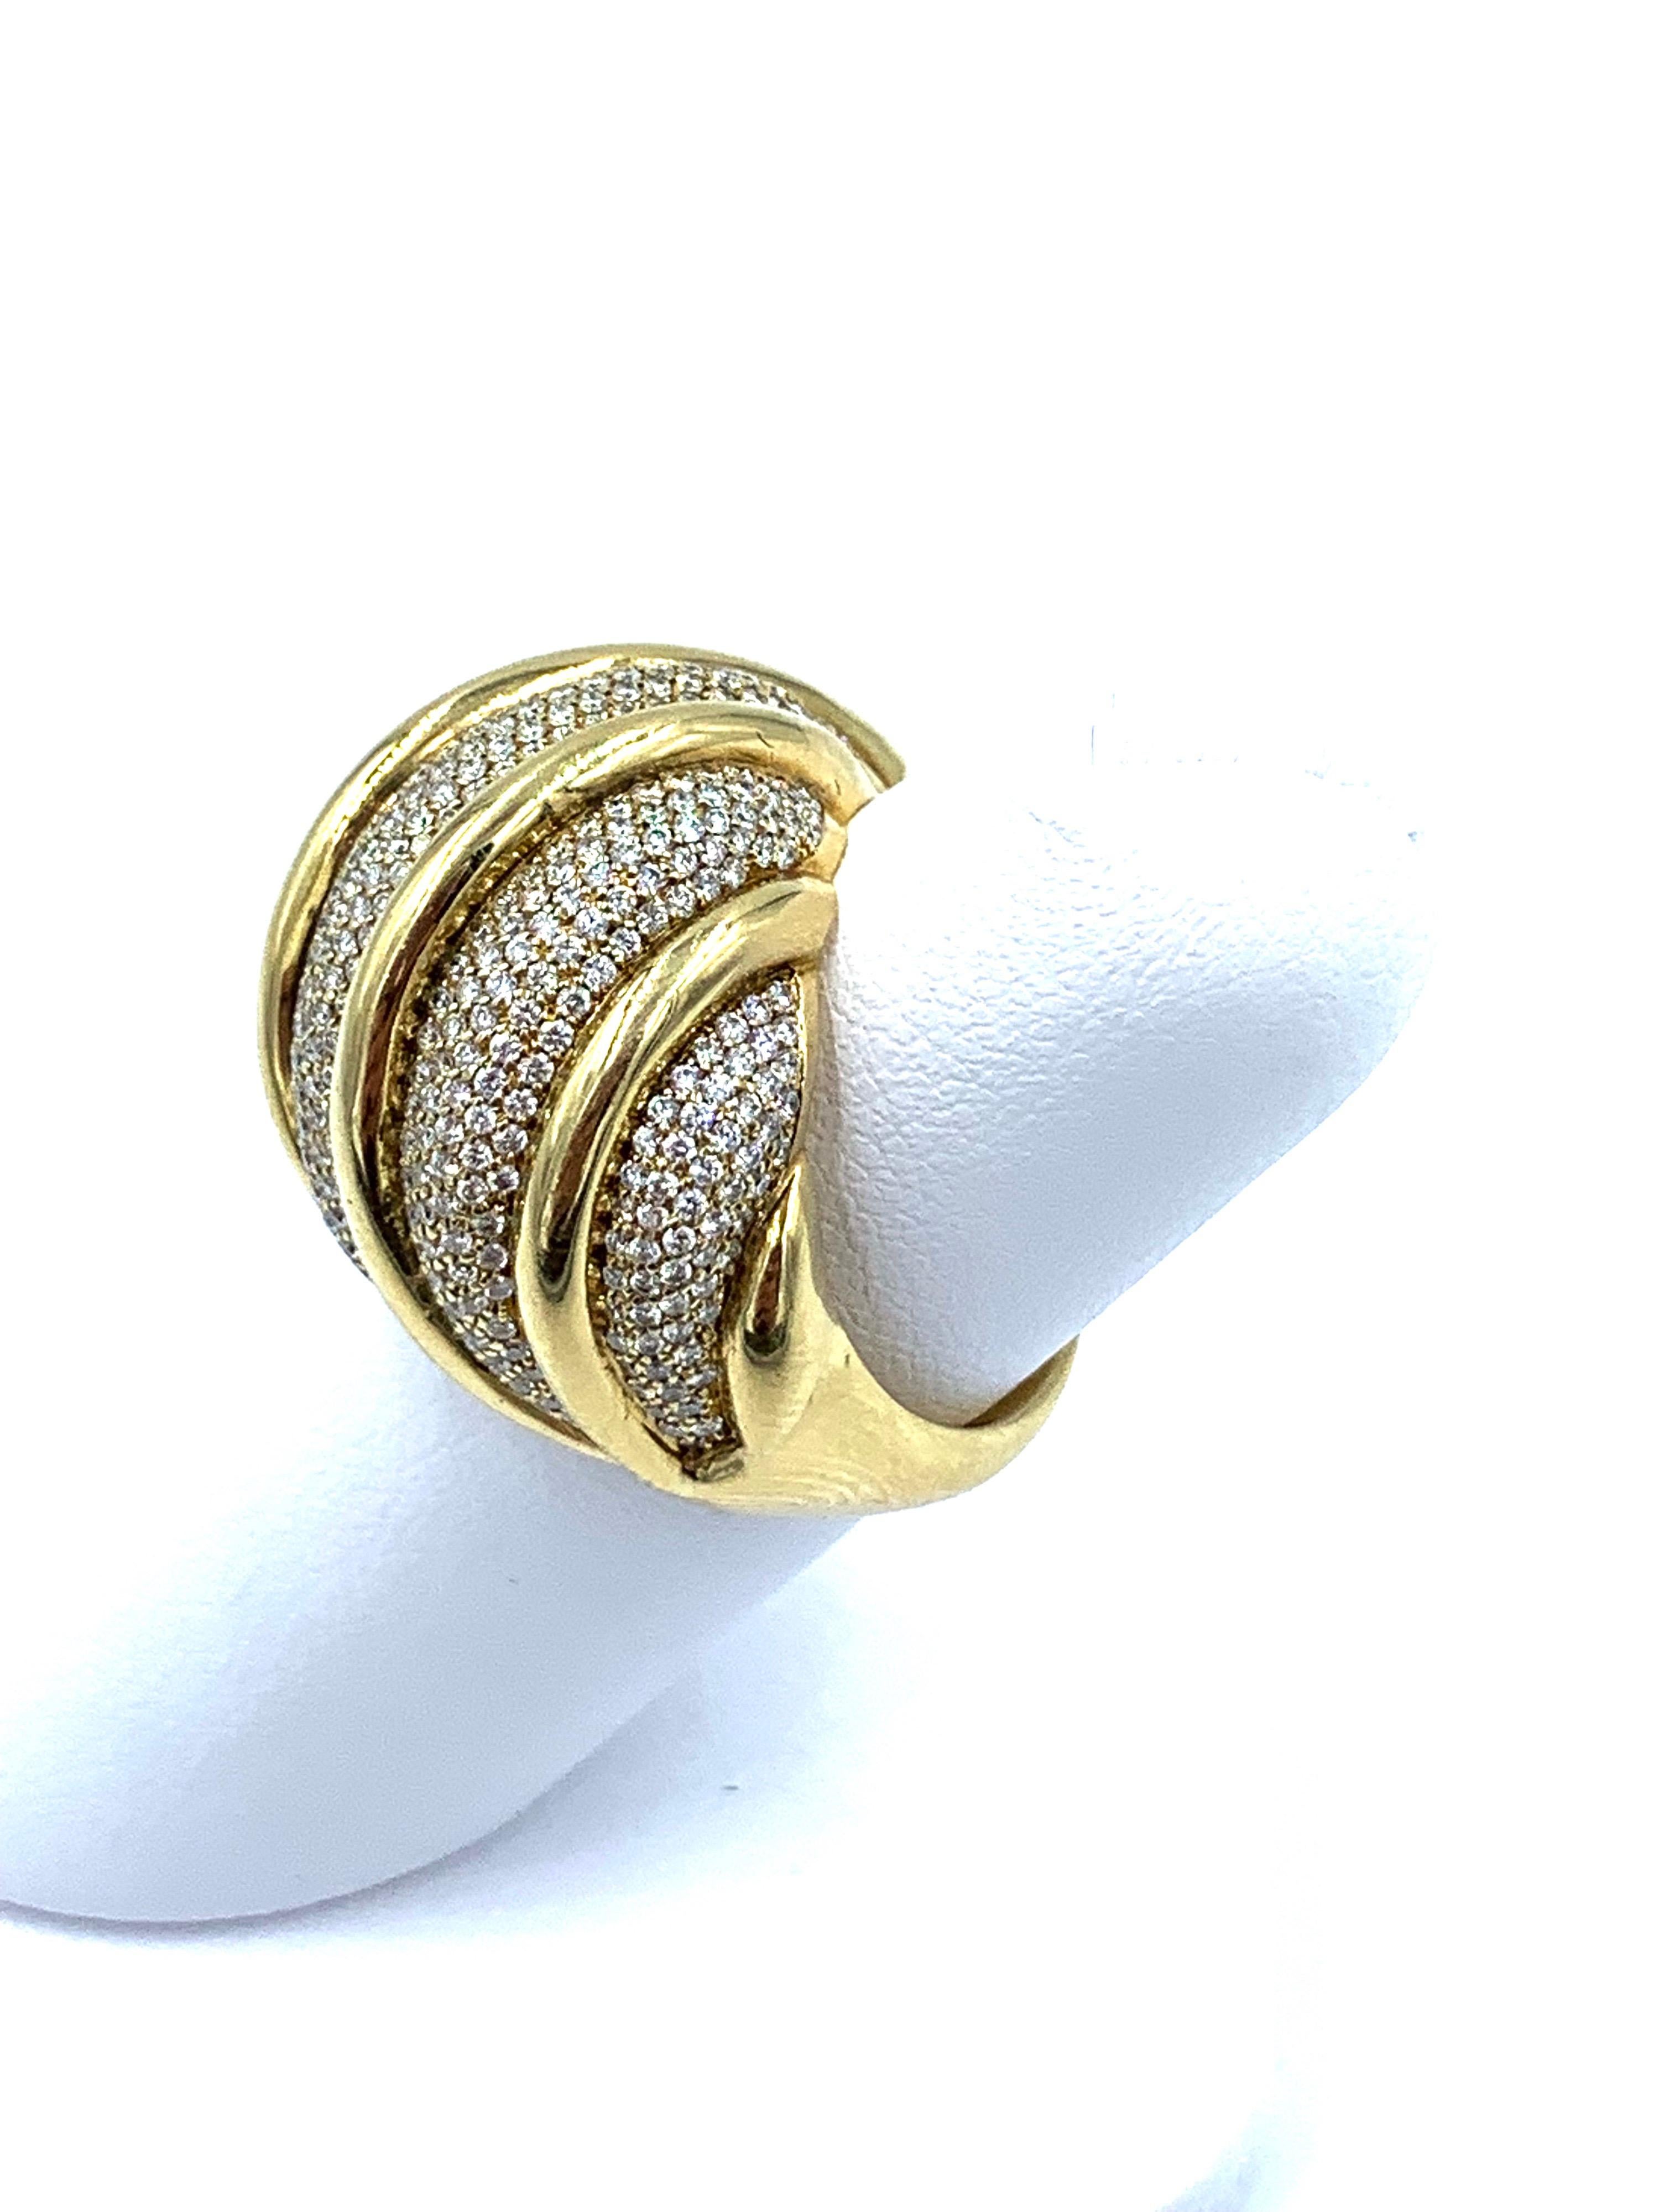 Paloma Picasso for Tiffany & Co. 18 Karat Gold and Diamond Ring In Good Condition For Sale In West Palm Beach, FL